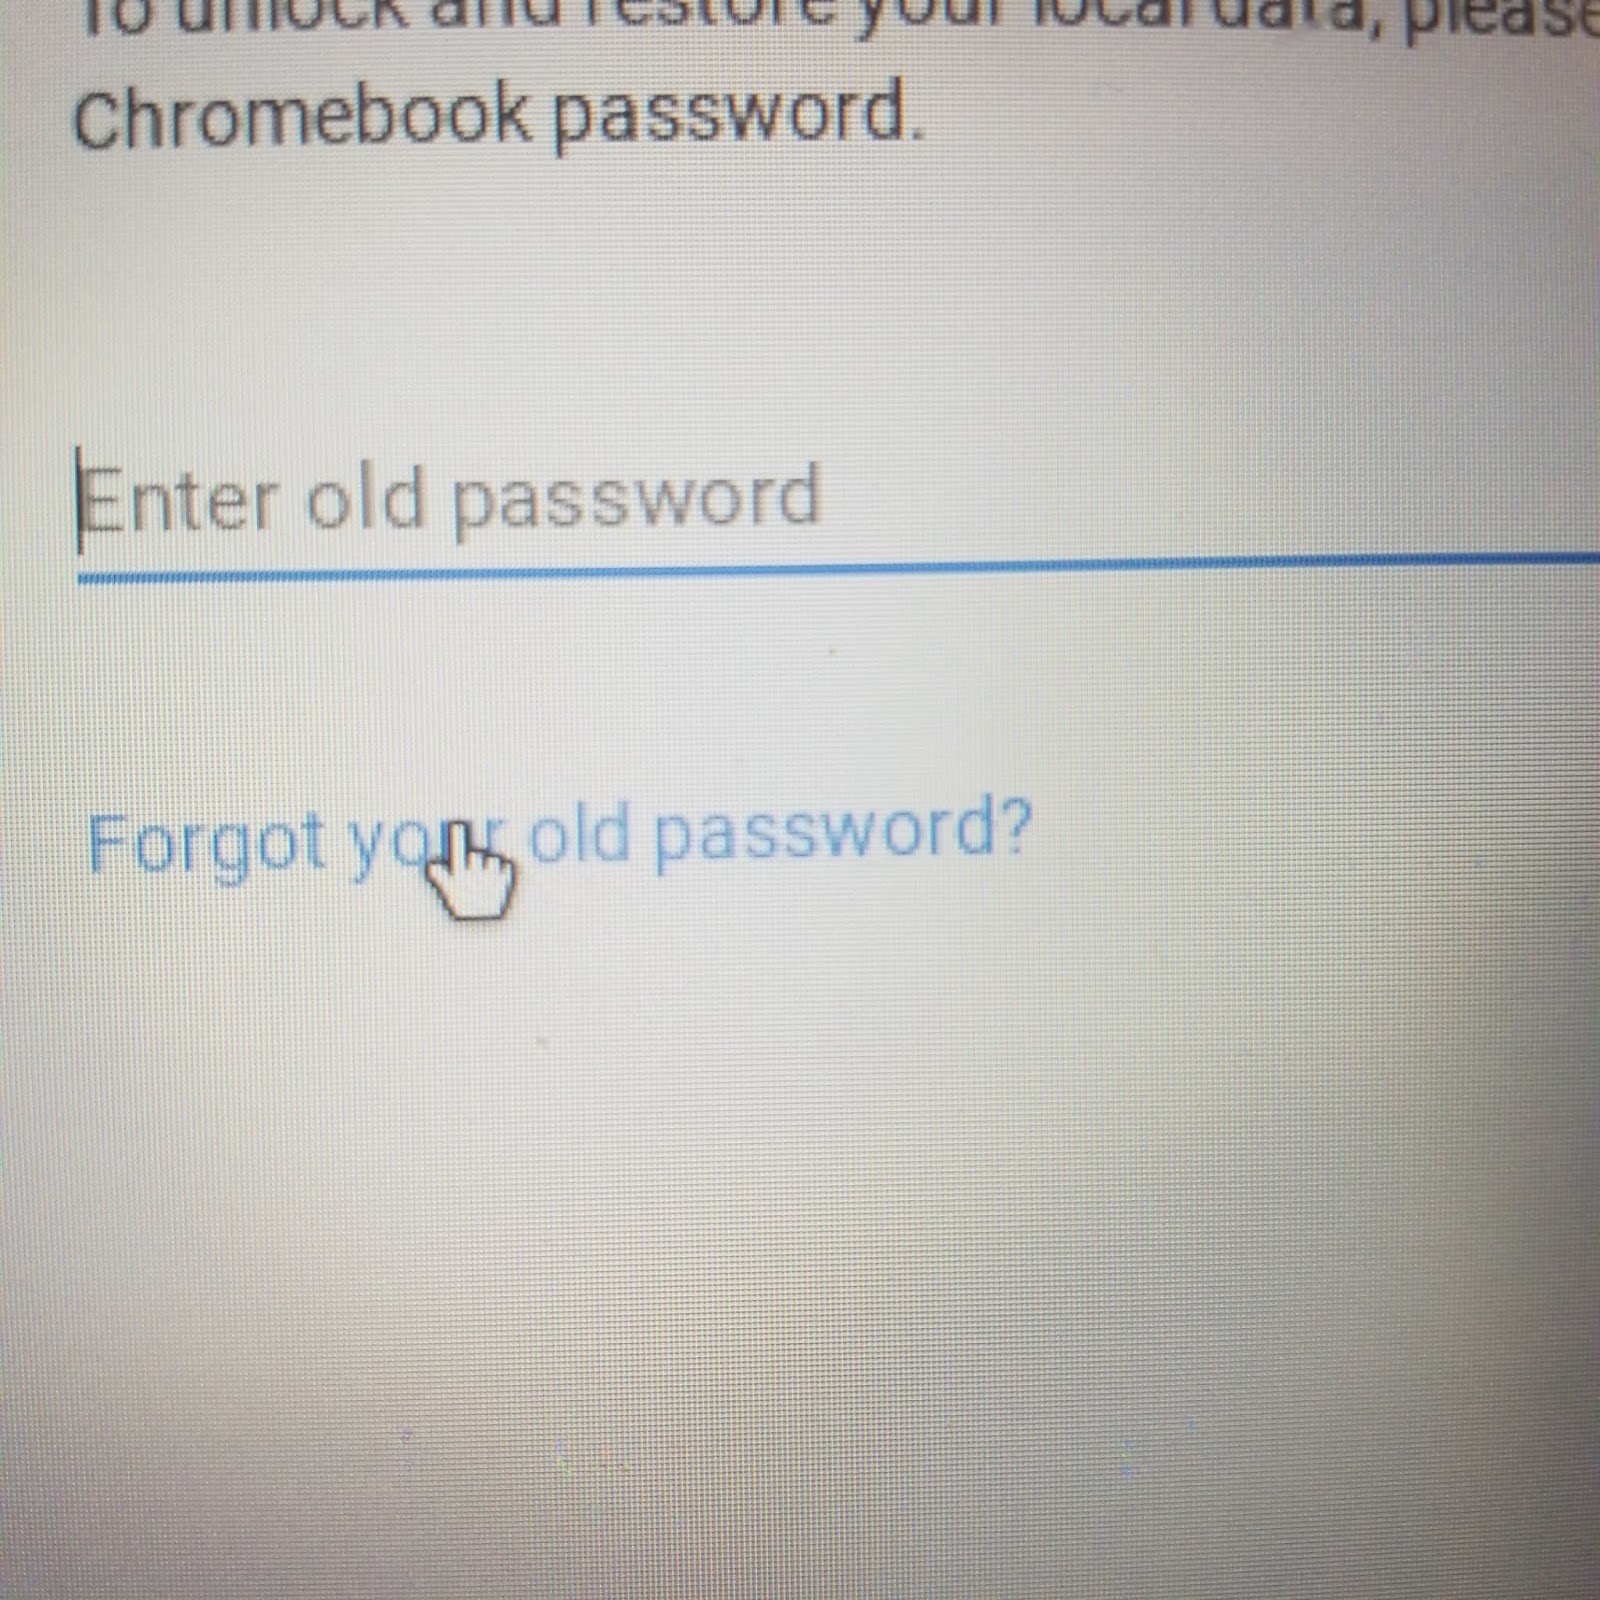 Forgot your old password?